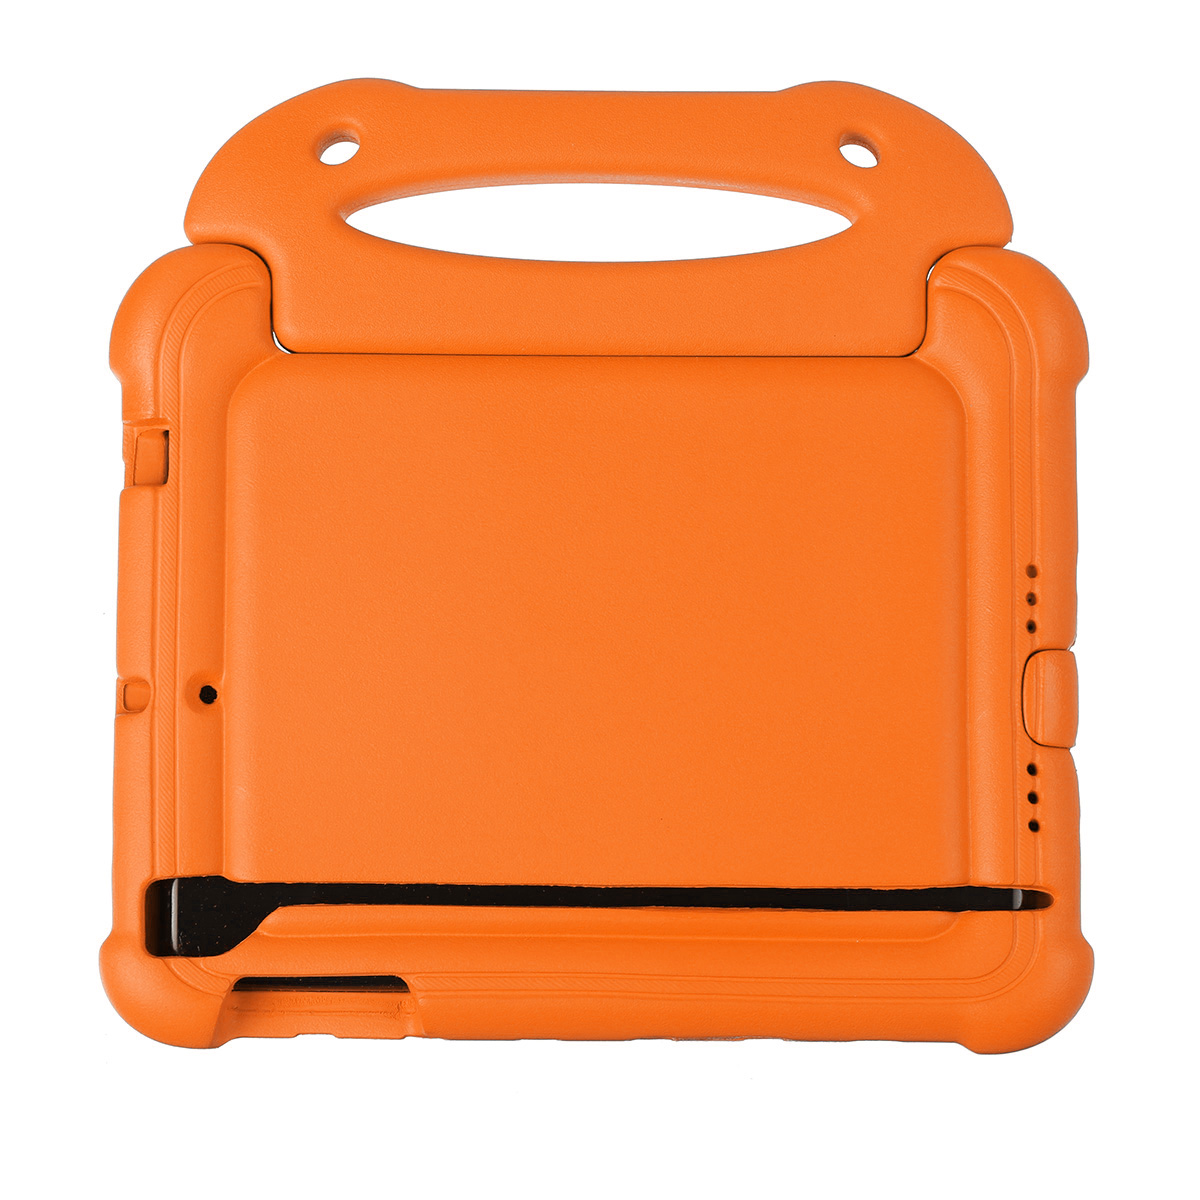 Portable-Kids-Friendly-Safe-EVA-with-Handle-Bracket-Stand-Tablet-Shockproof-Protective-Case-for-iPad-1777875-6